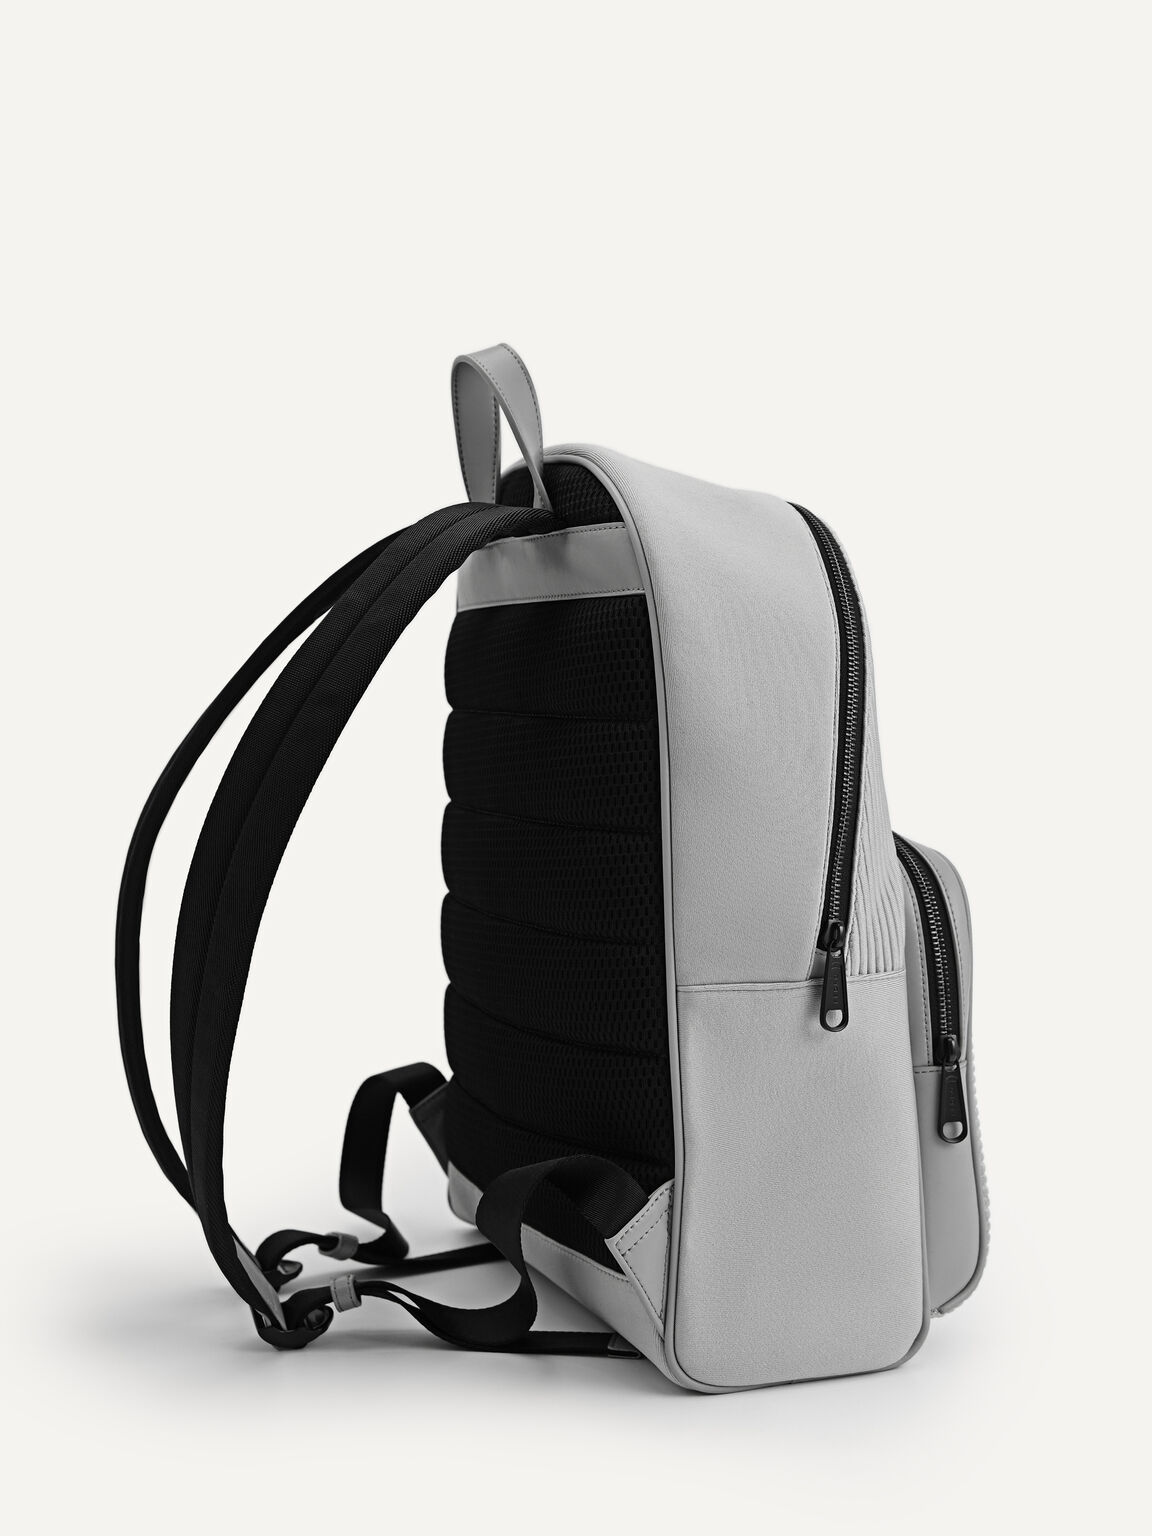 rePEDRO Pleated Backpack, Grey, hi-res